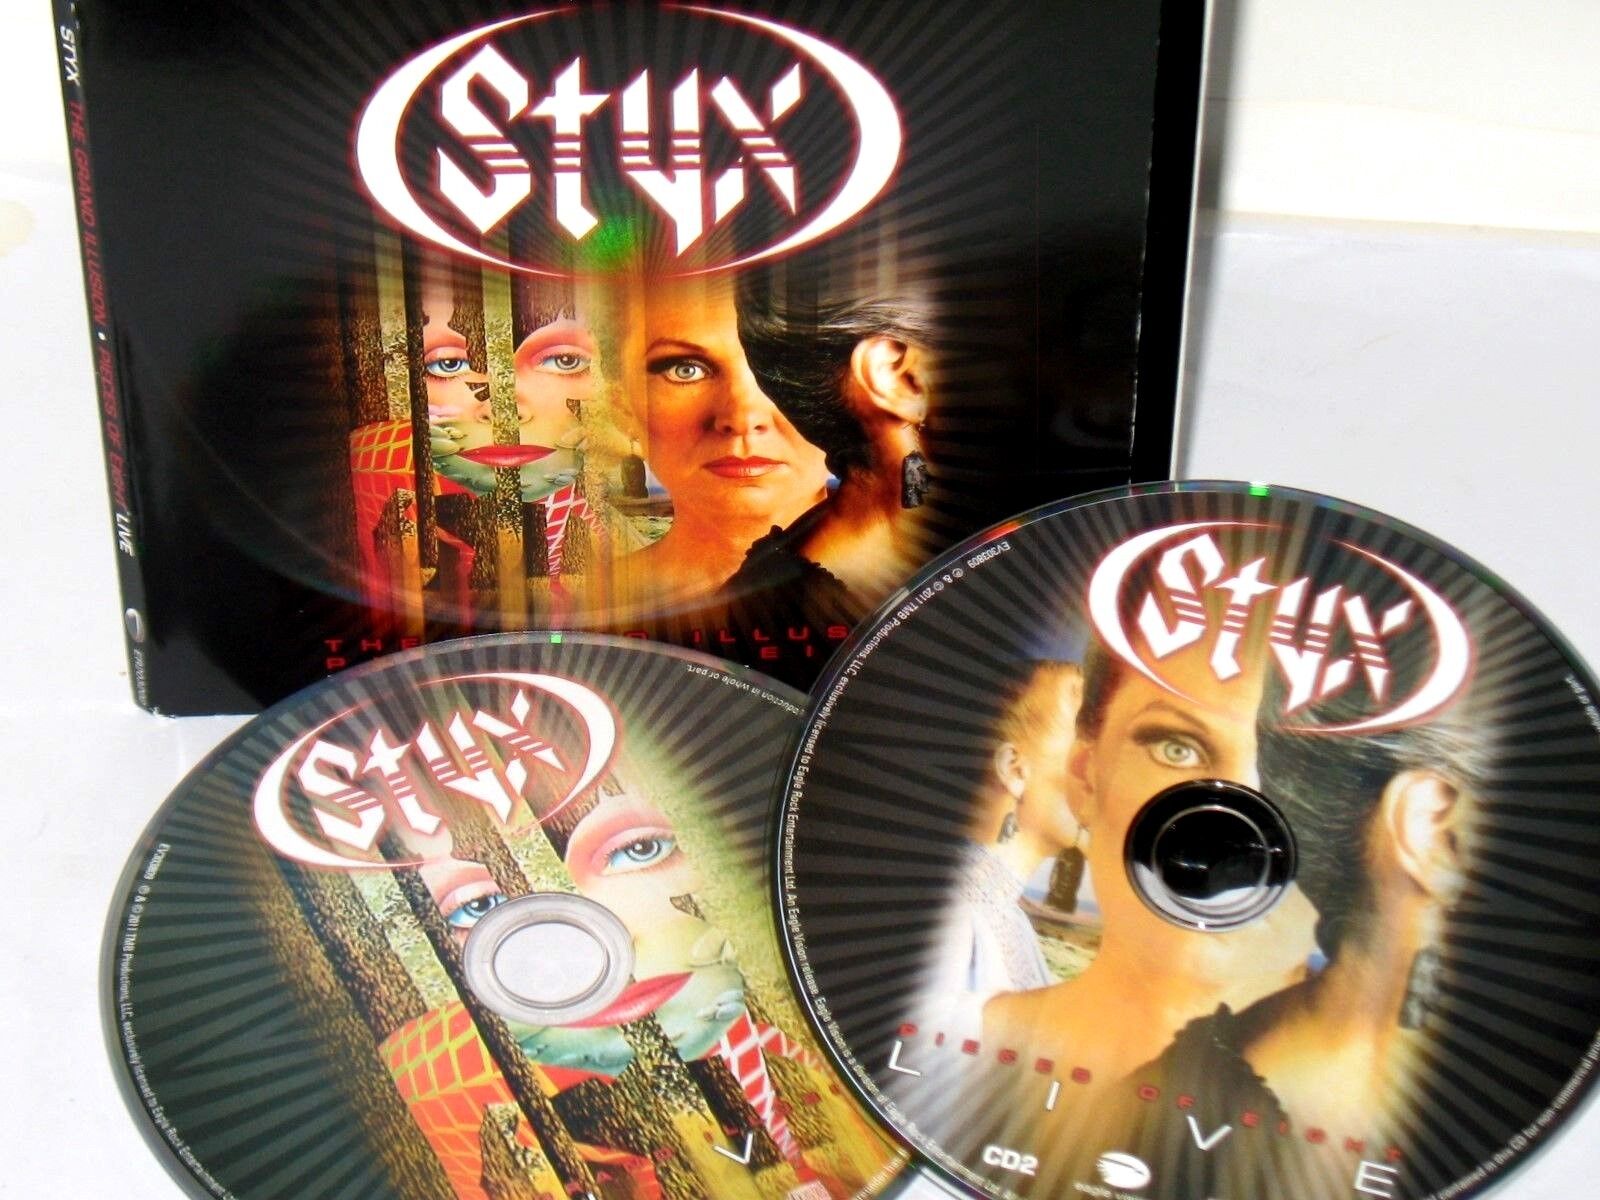 The Grand Illusion/Pieces of Eight Live [Digipak] by Styx (CD, May 